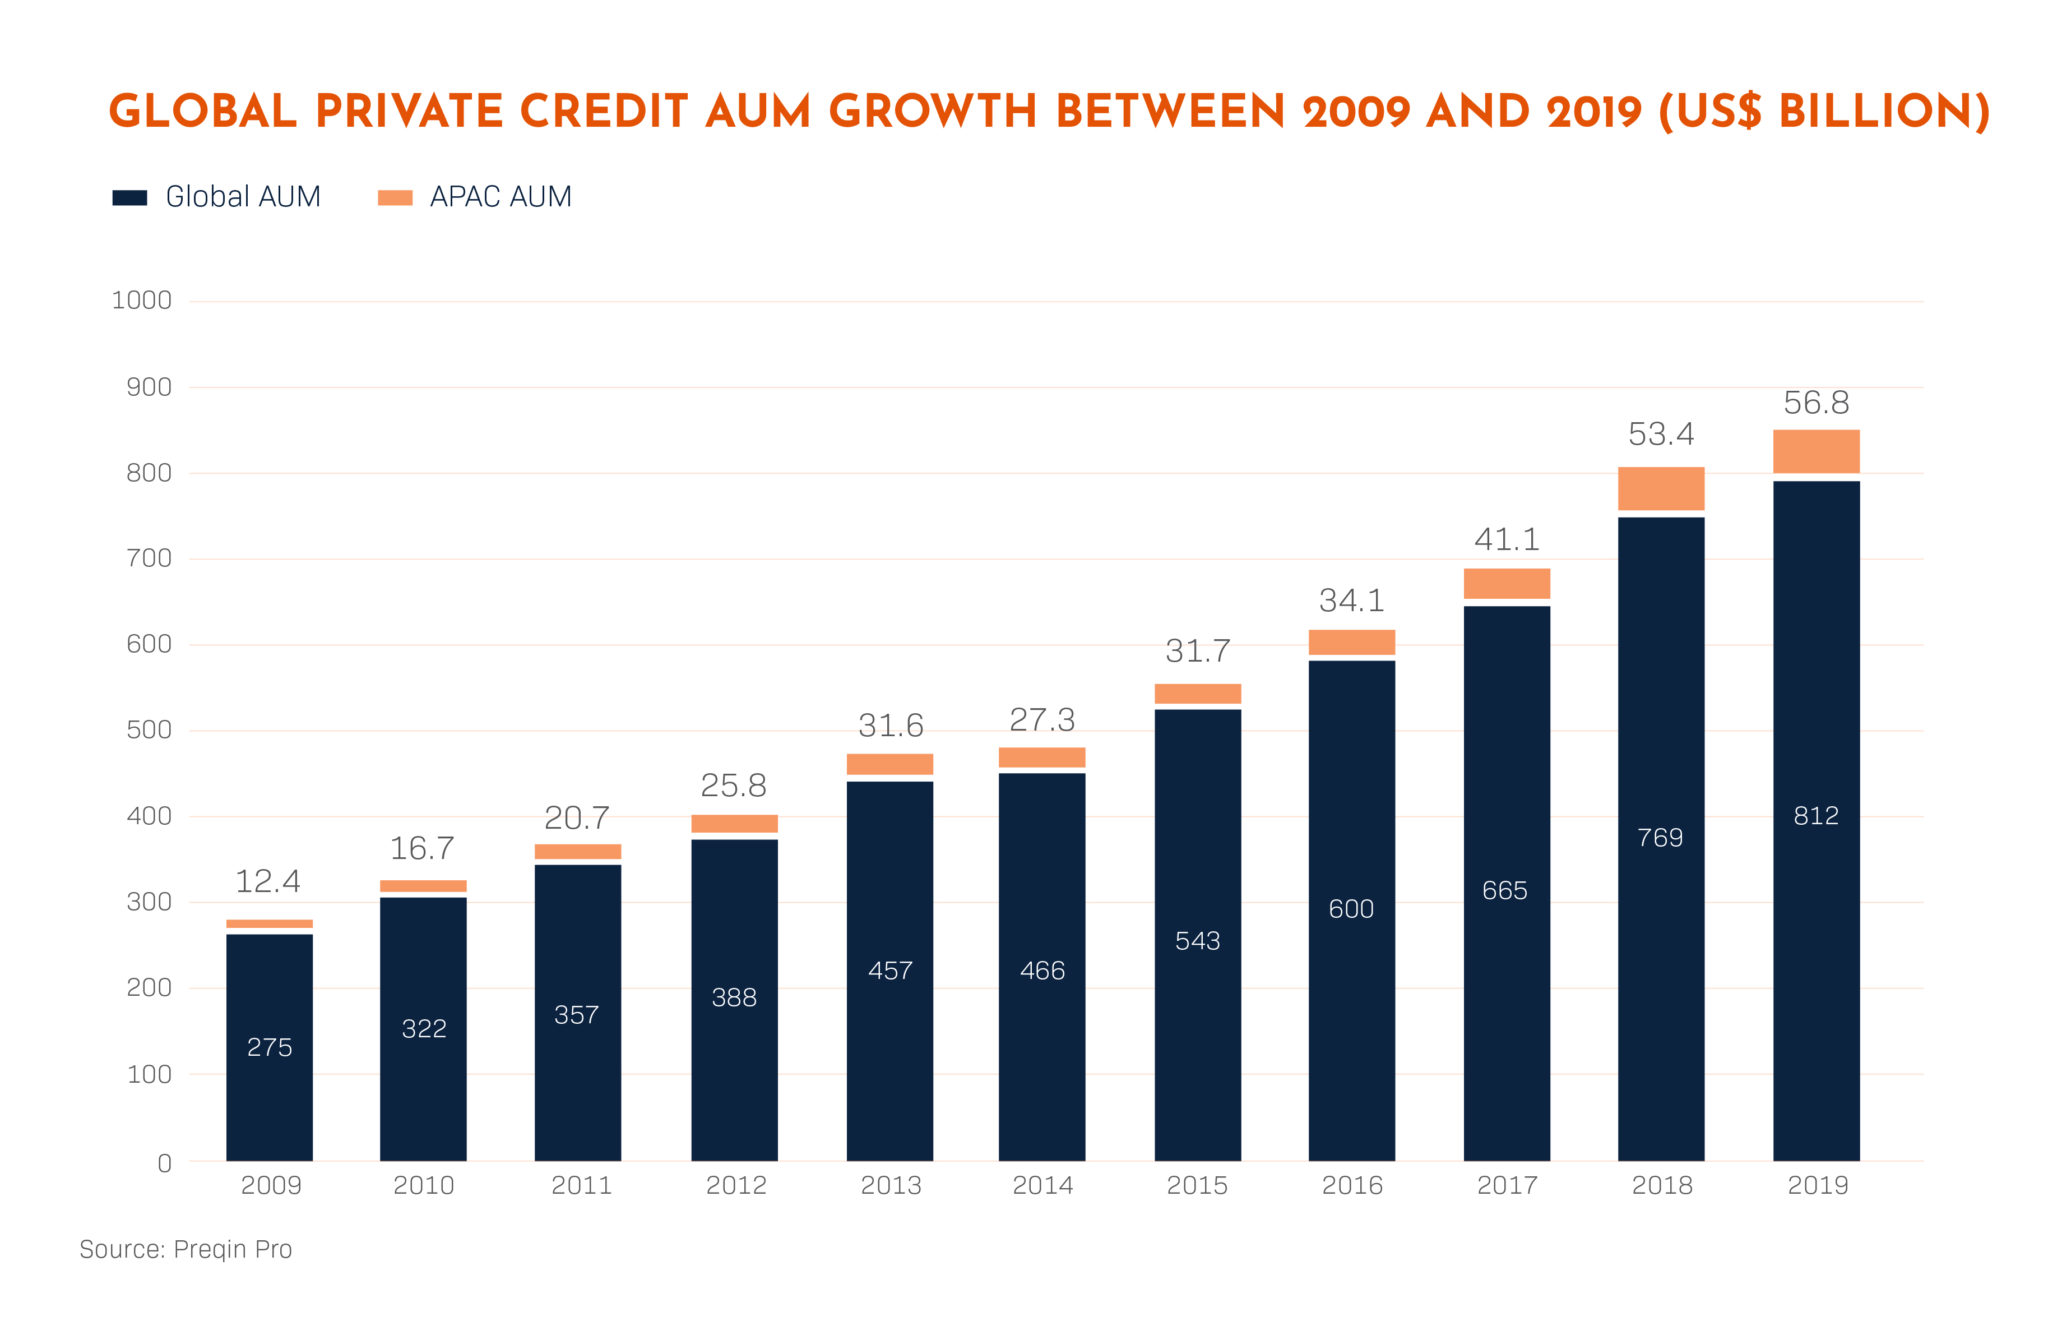 Keeping private credit on a sustainable growth path EquitiesFirst